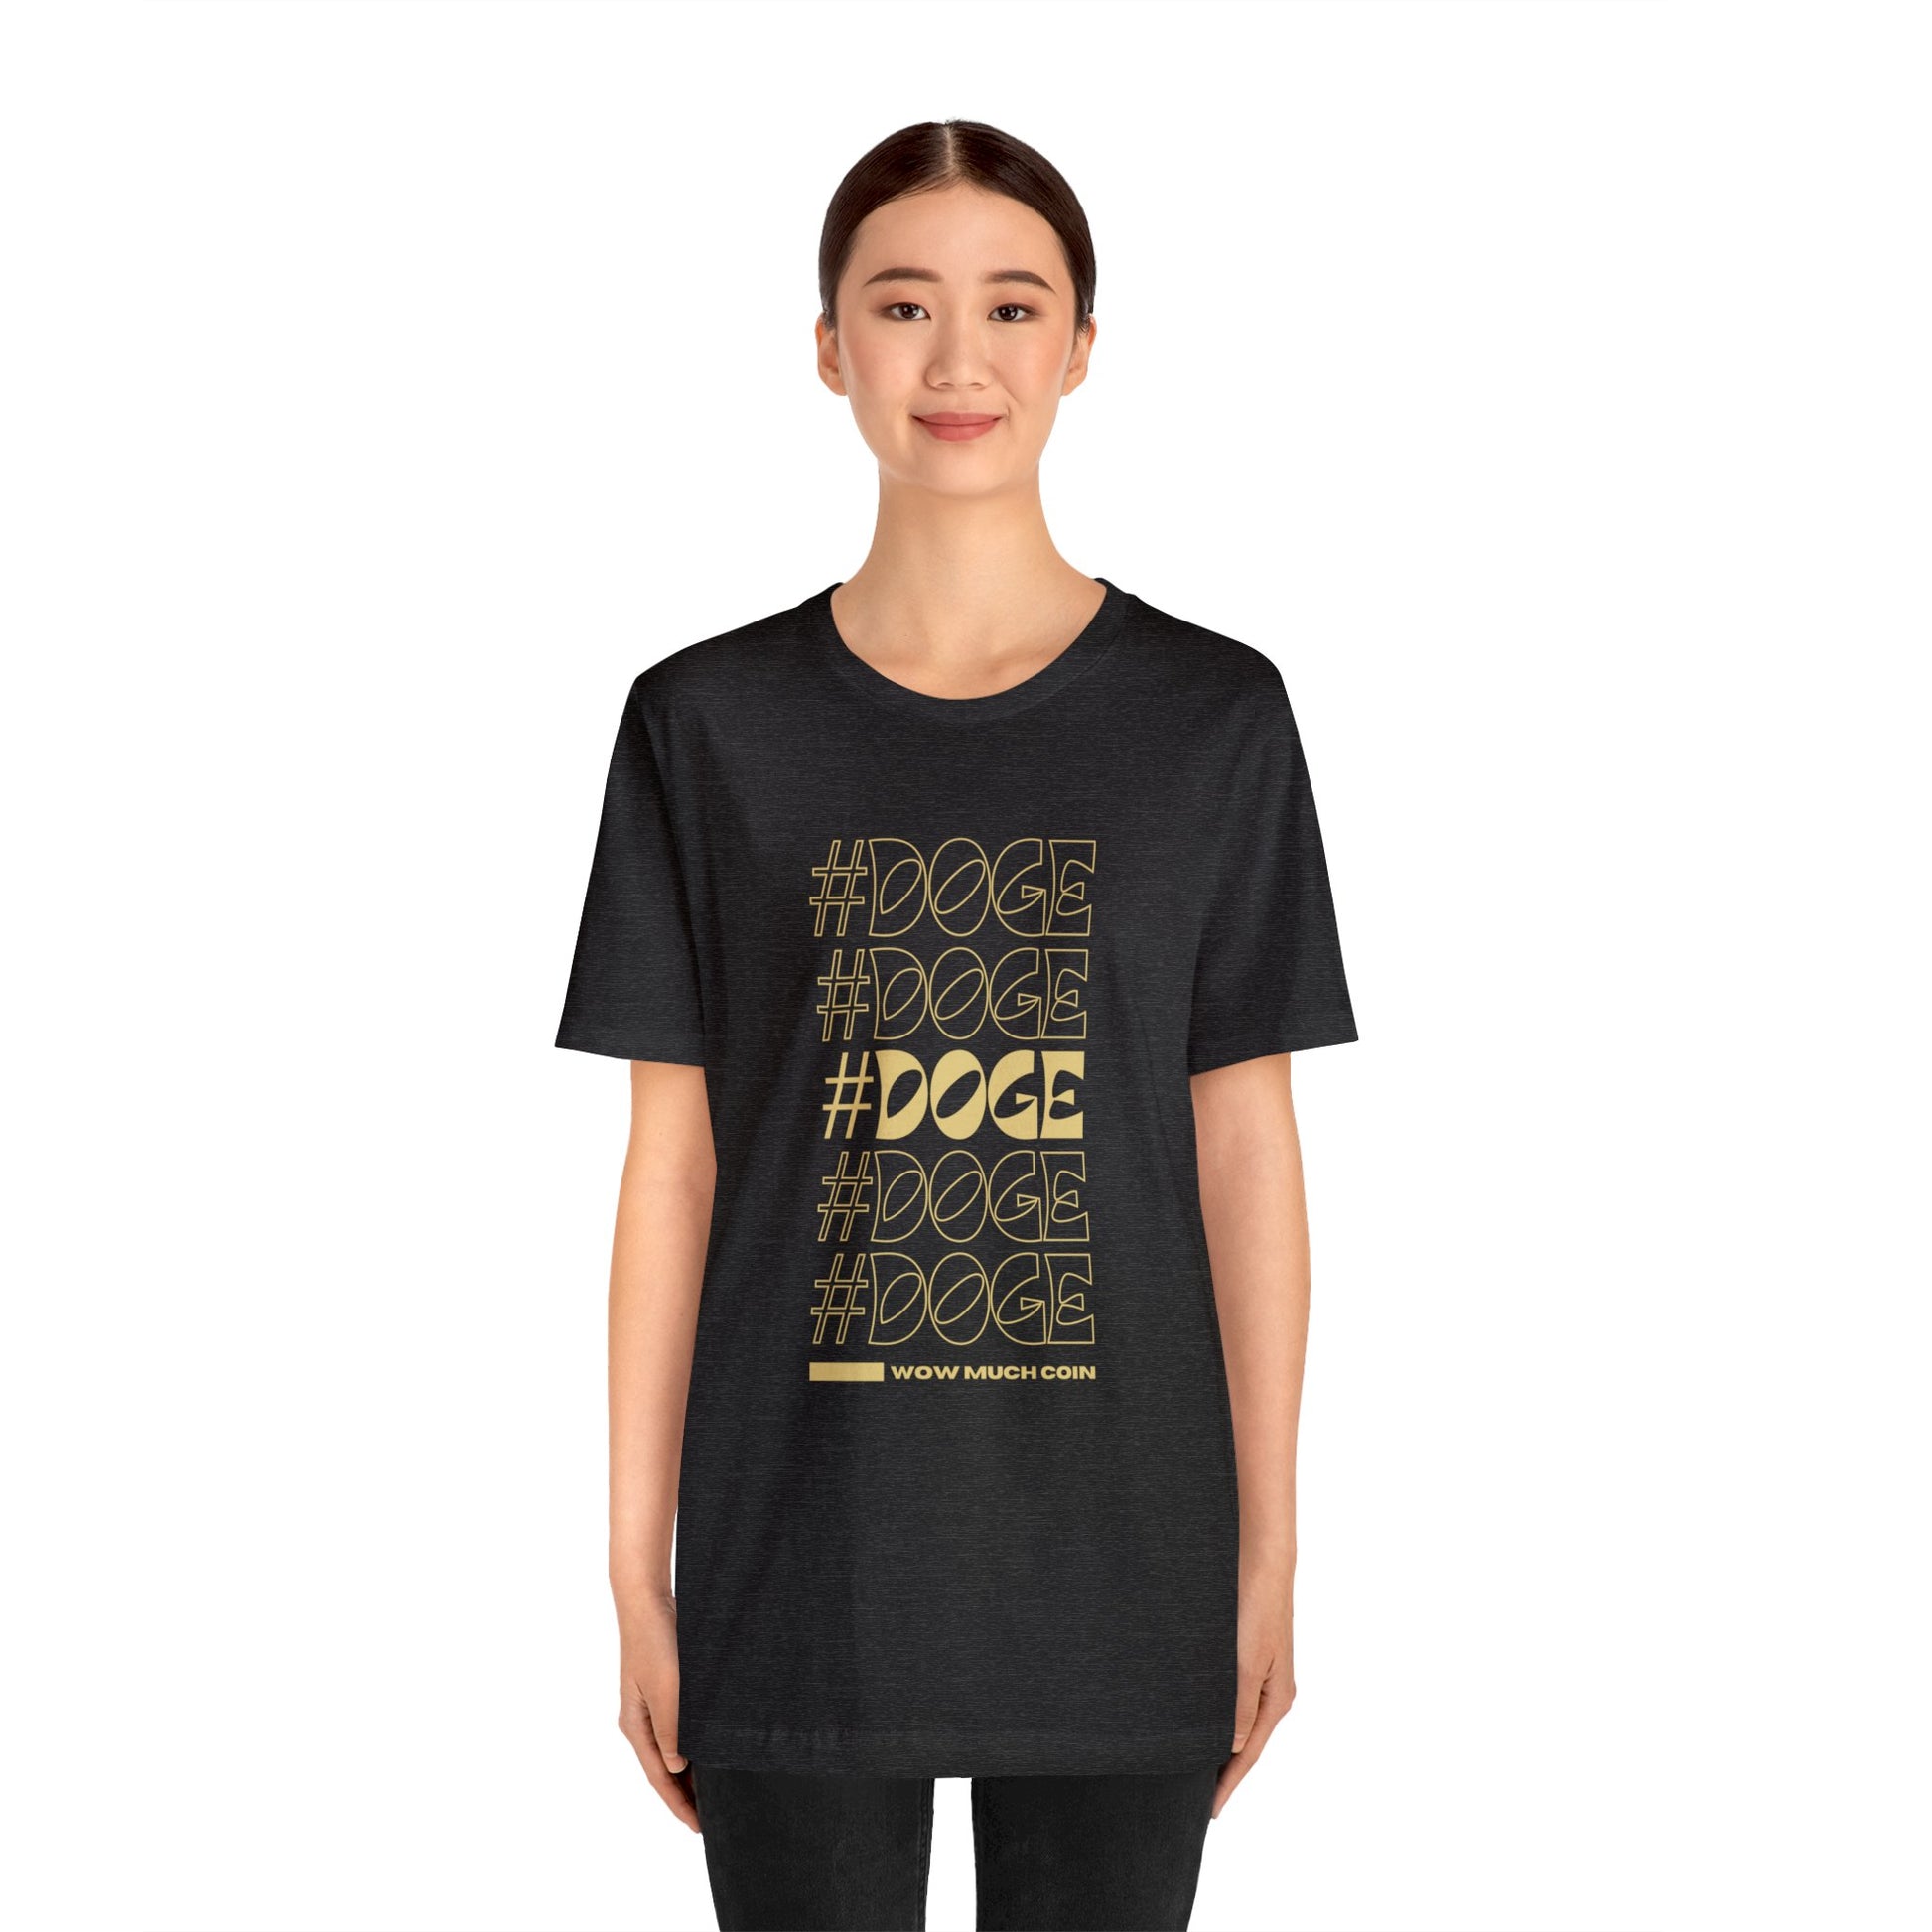 #DOGE - Wow Much Coin T-Shirt